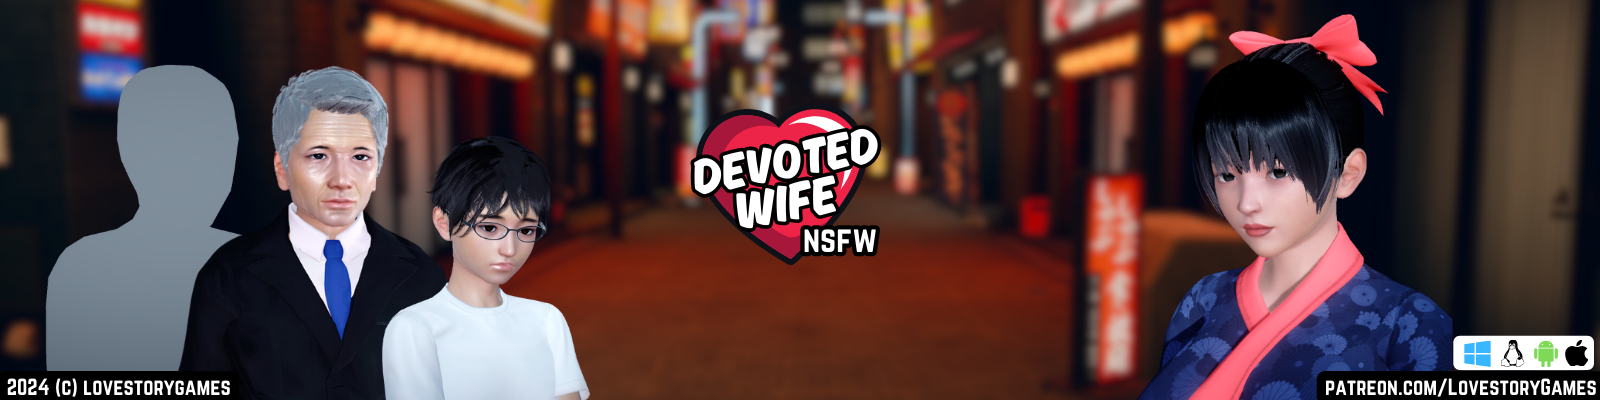 Devoted Wife 0.3